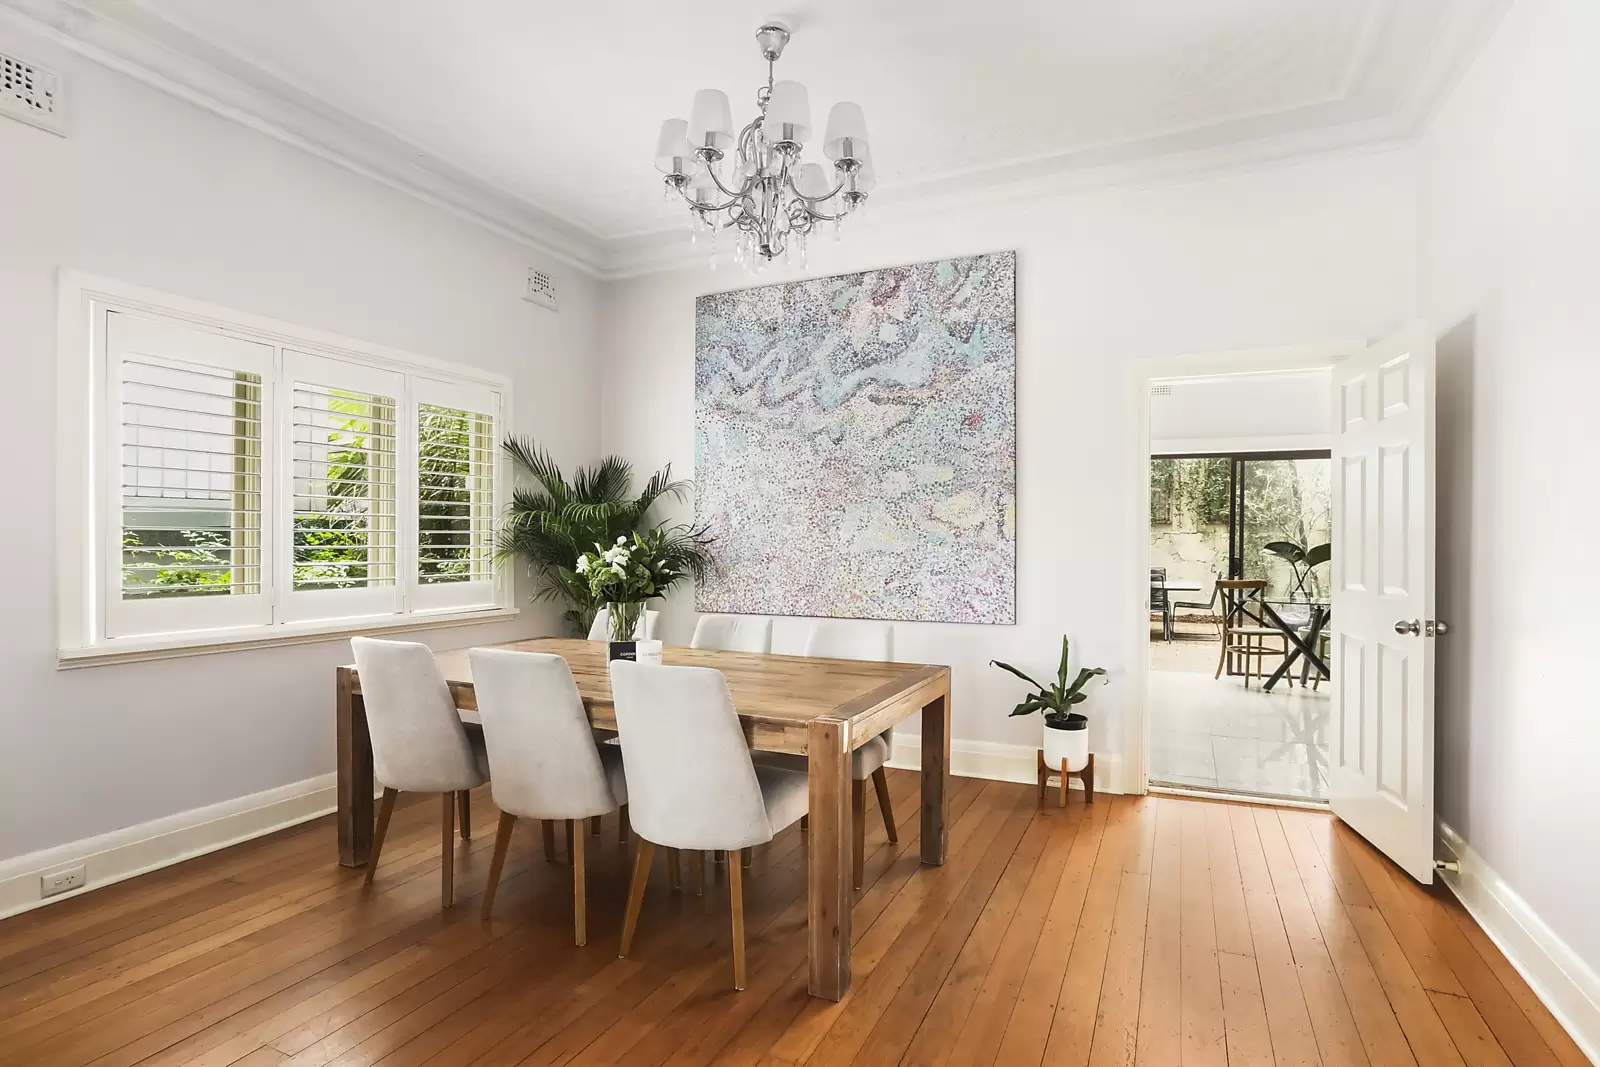 Photo #3: 16 Woodland Street, Coogee - Sold by Sydney Sotheby's International Realty